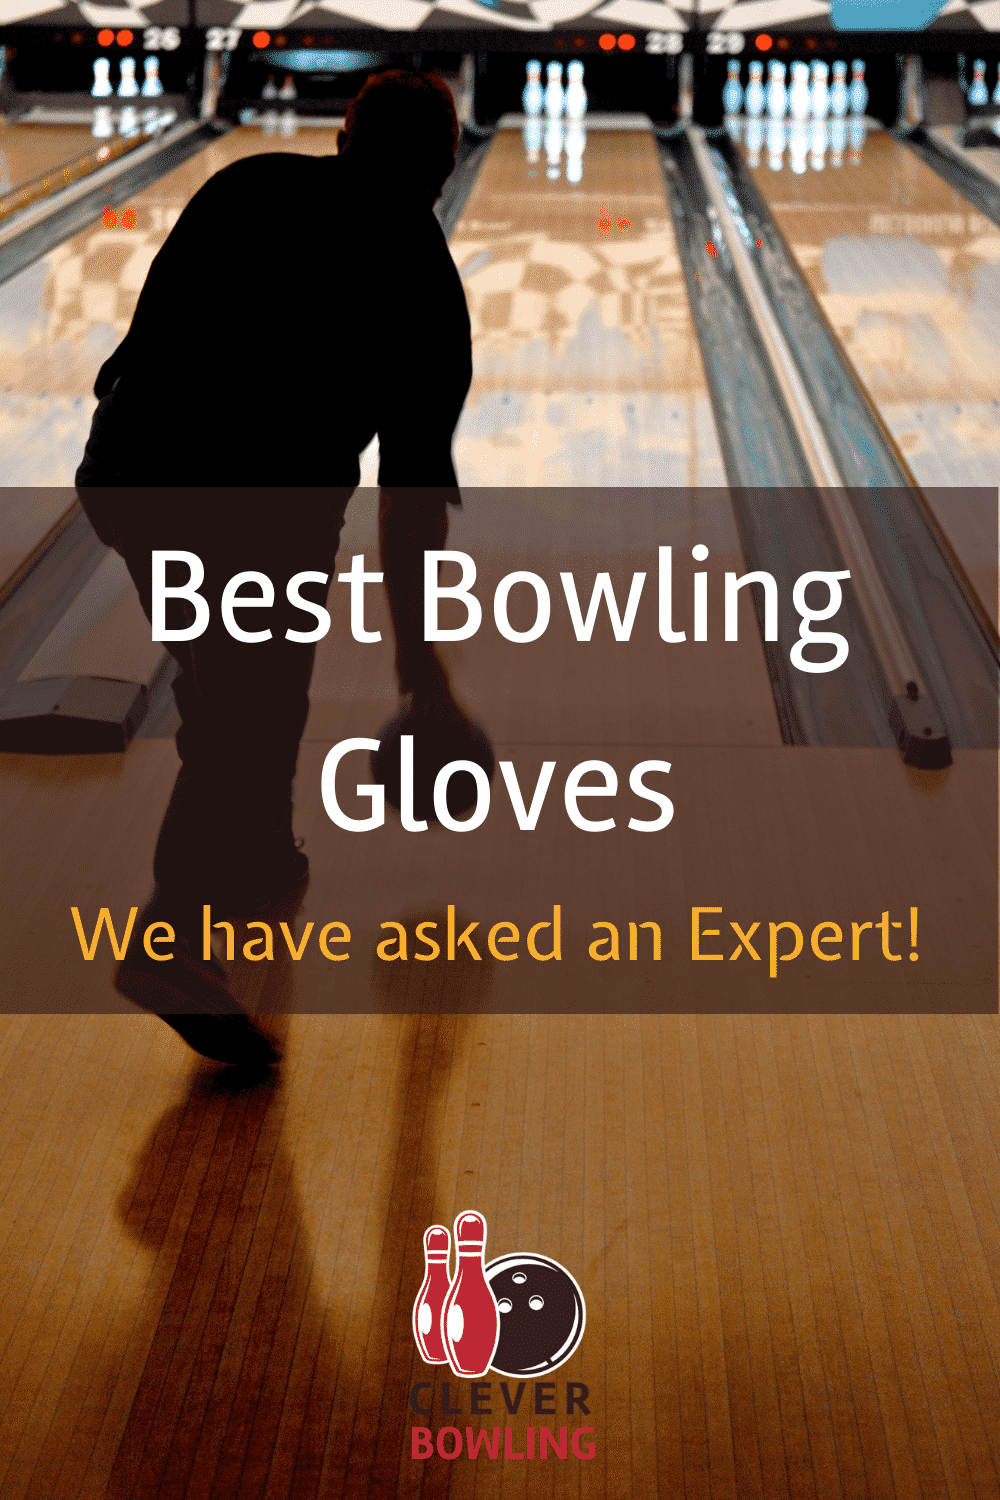 Best Bowling Gloves